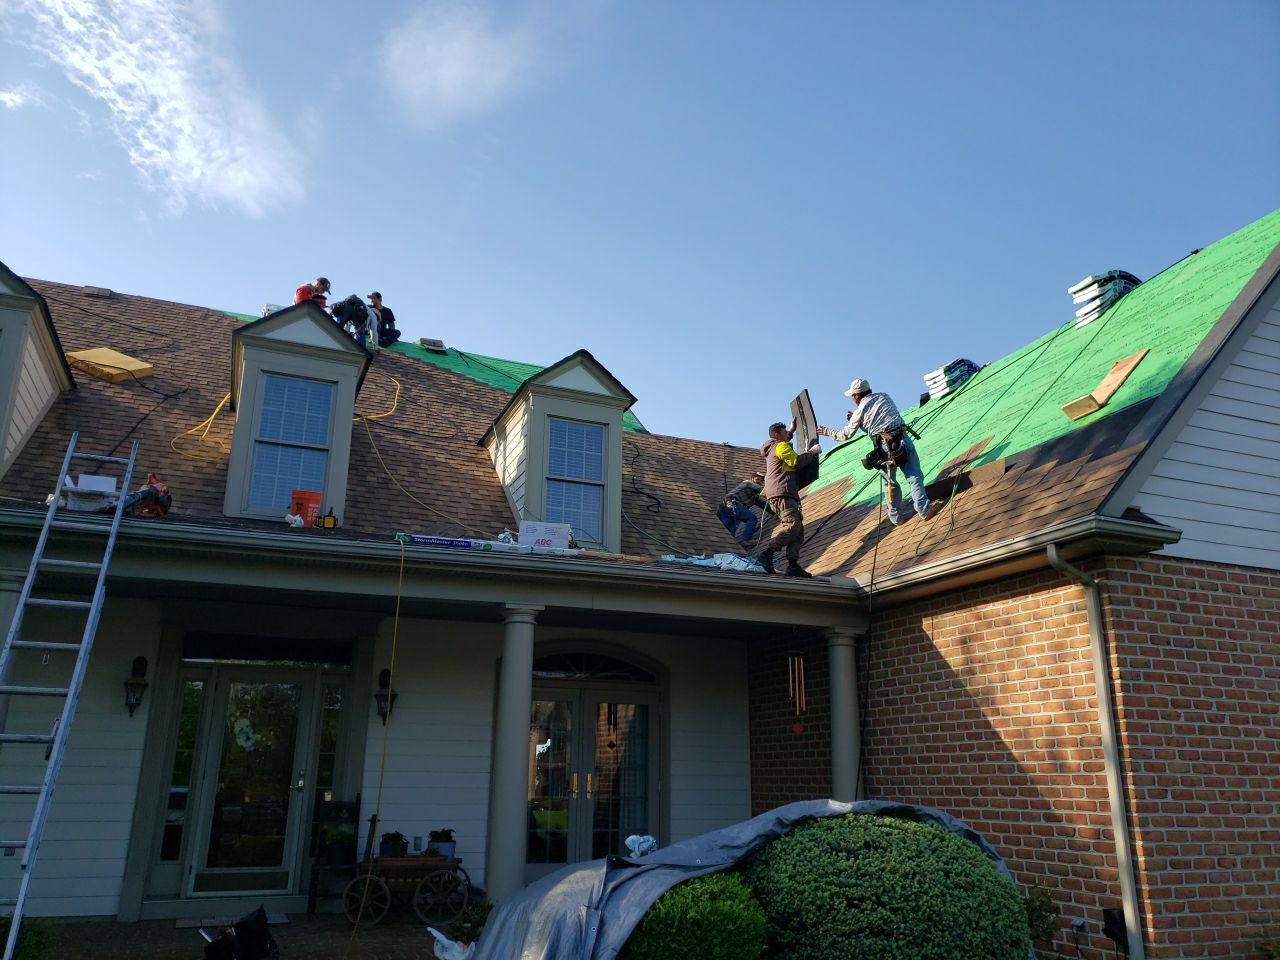 men working on roof Construction